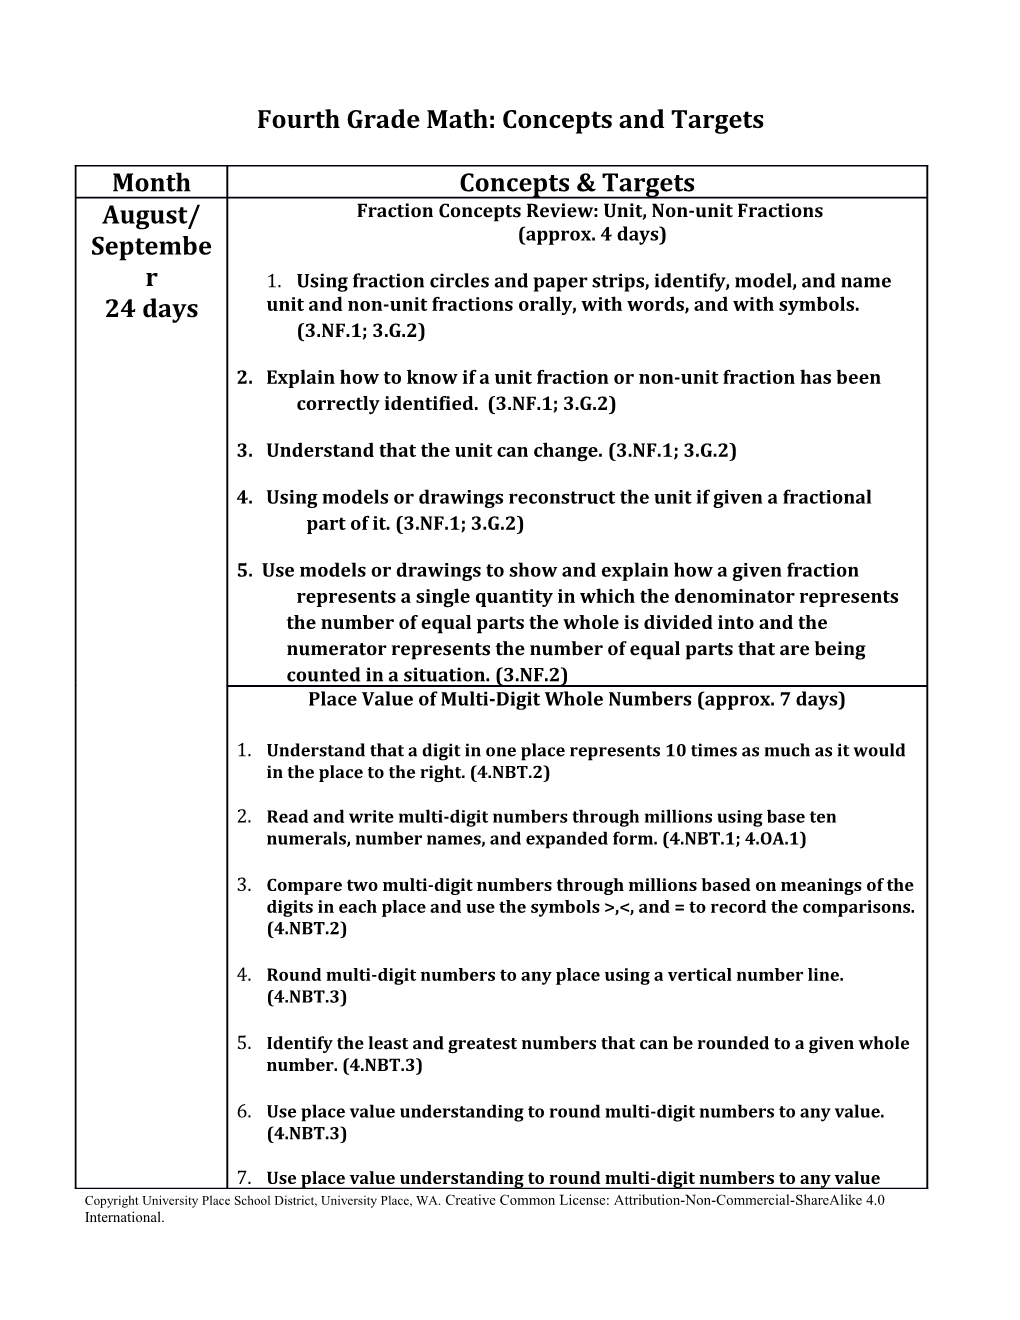 Fourth Grade Math: Concepts and Targets